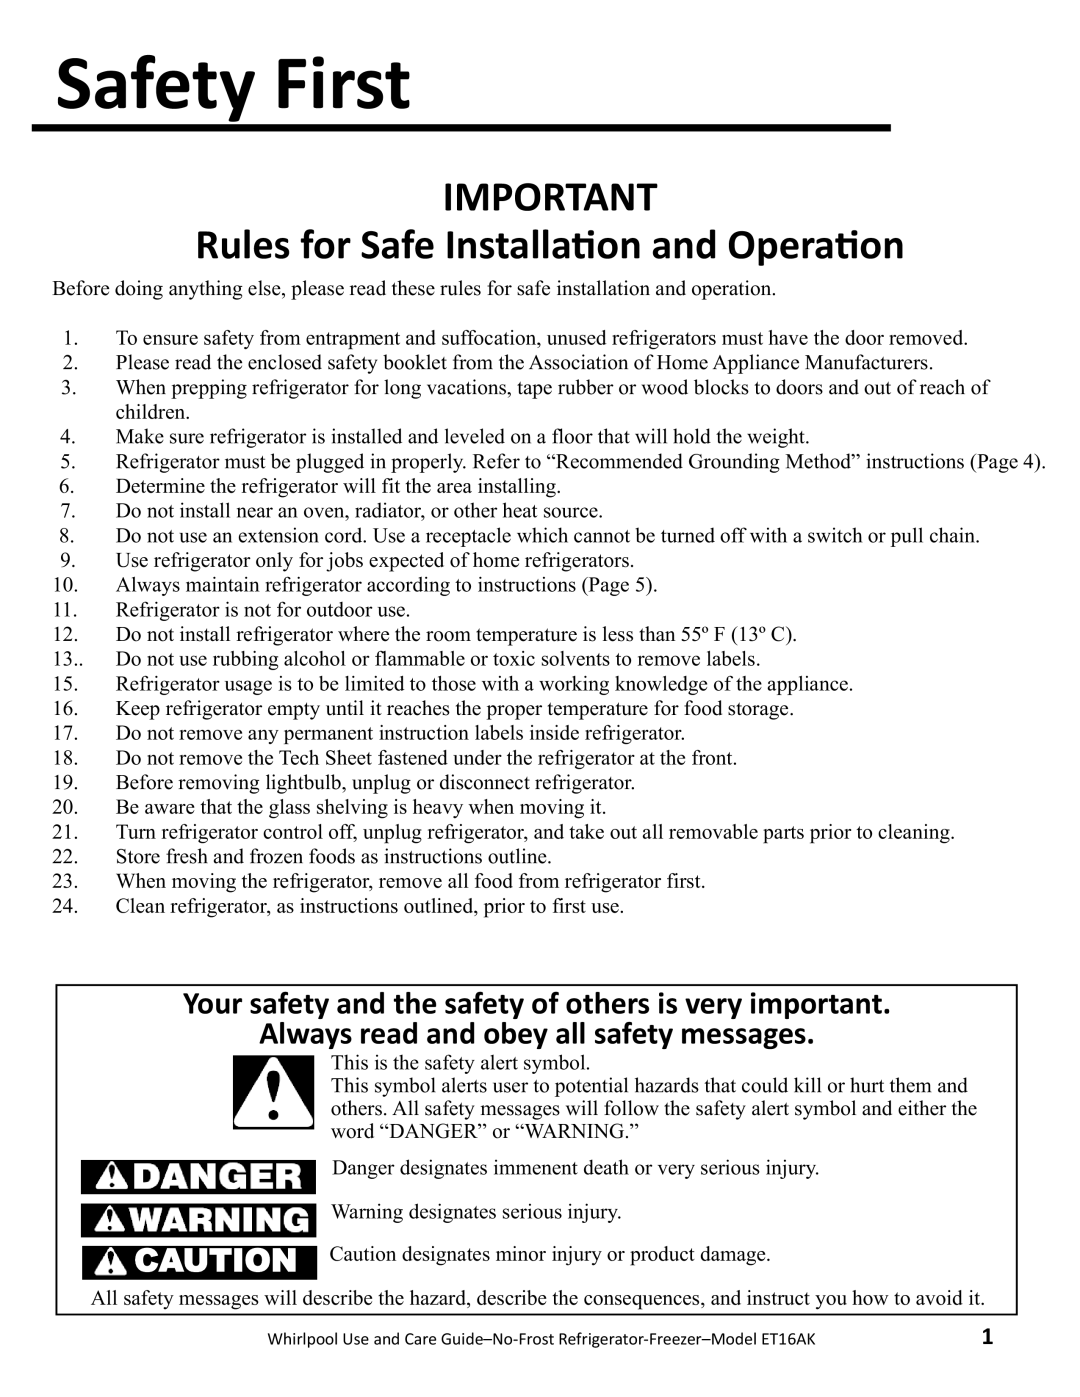 Whirlpool ET16AK manual Safety First, Rules for Safe Installa/on and Opera/on, Always read and obey all safety messages 